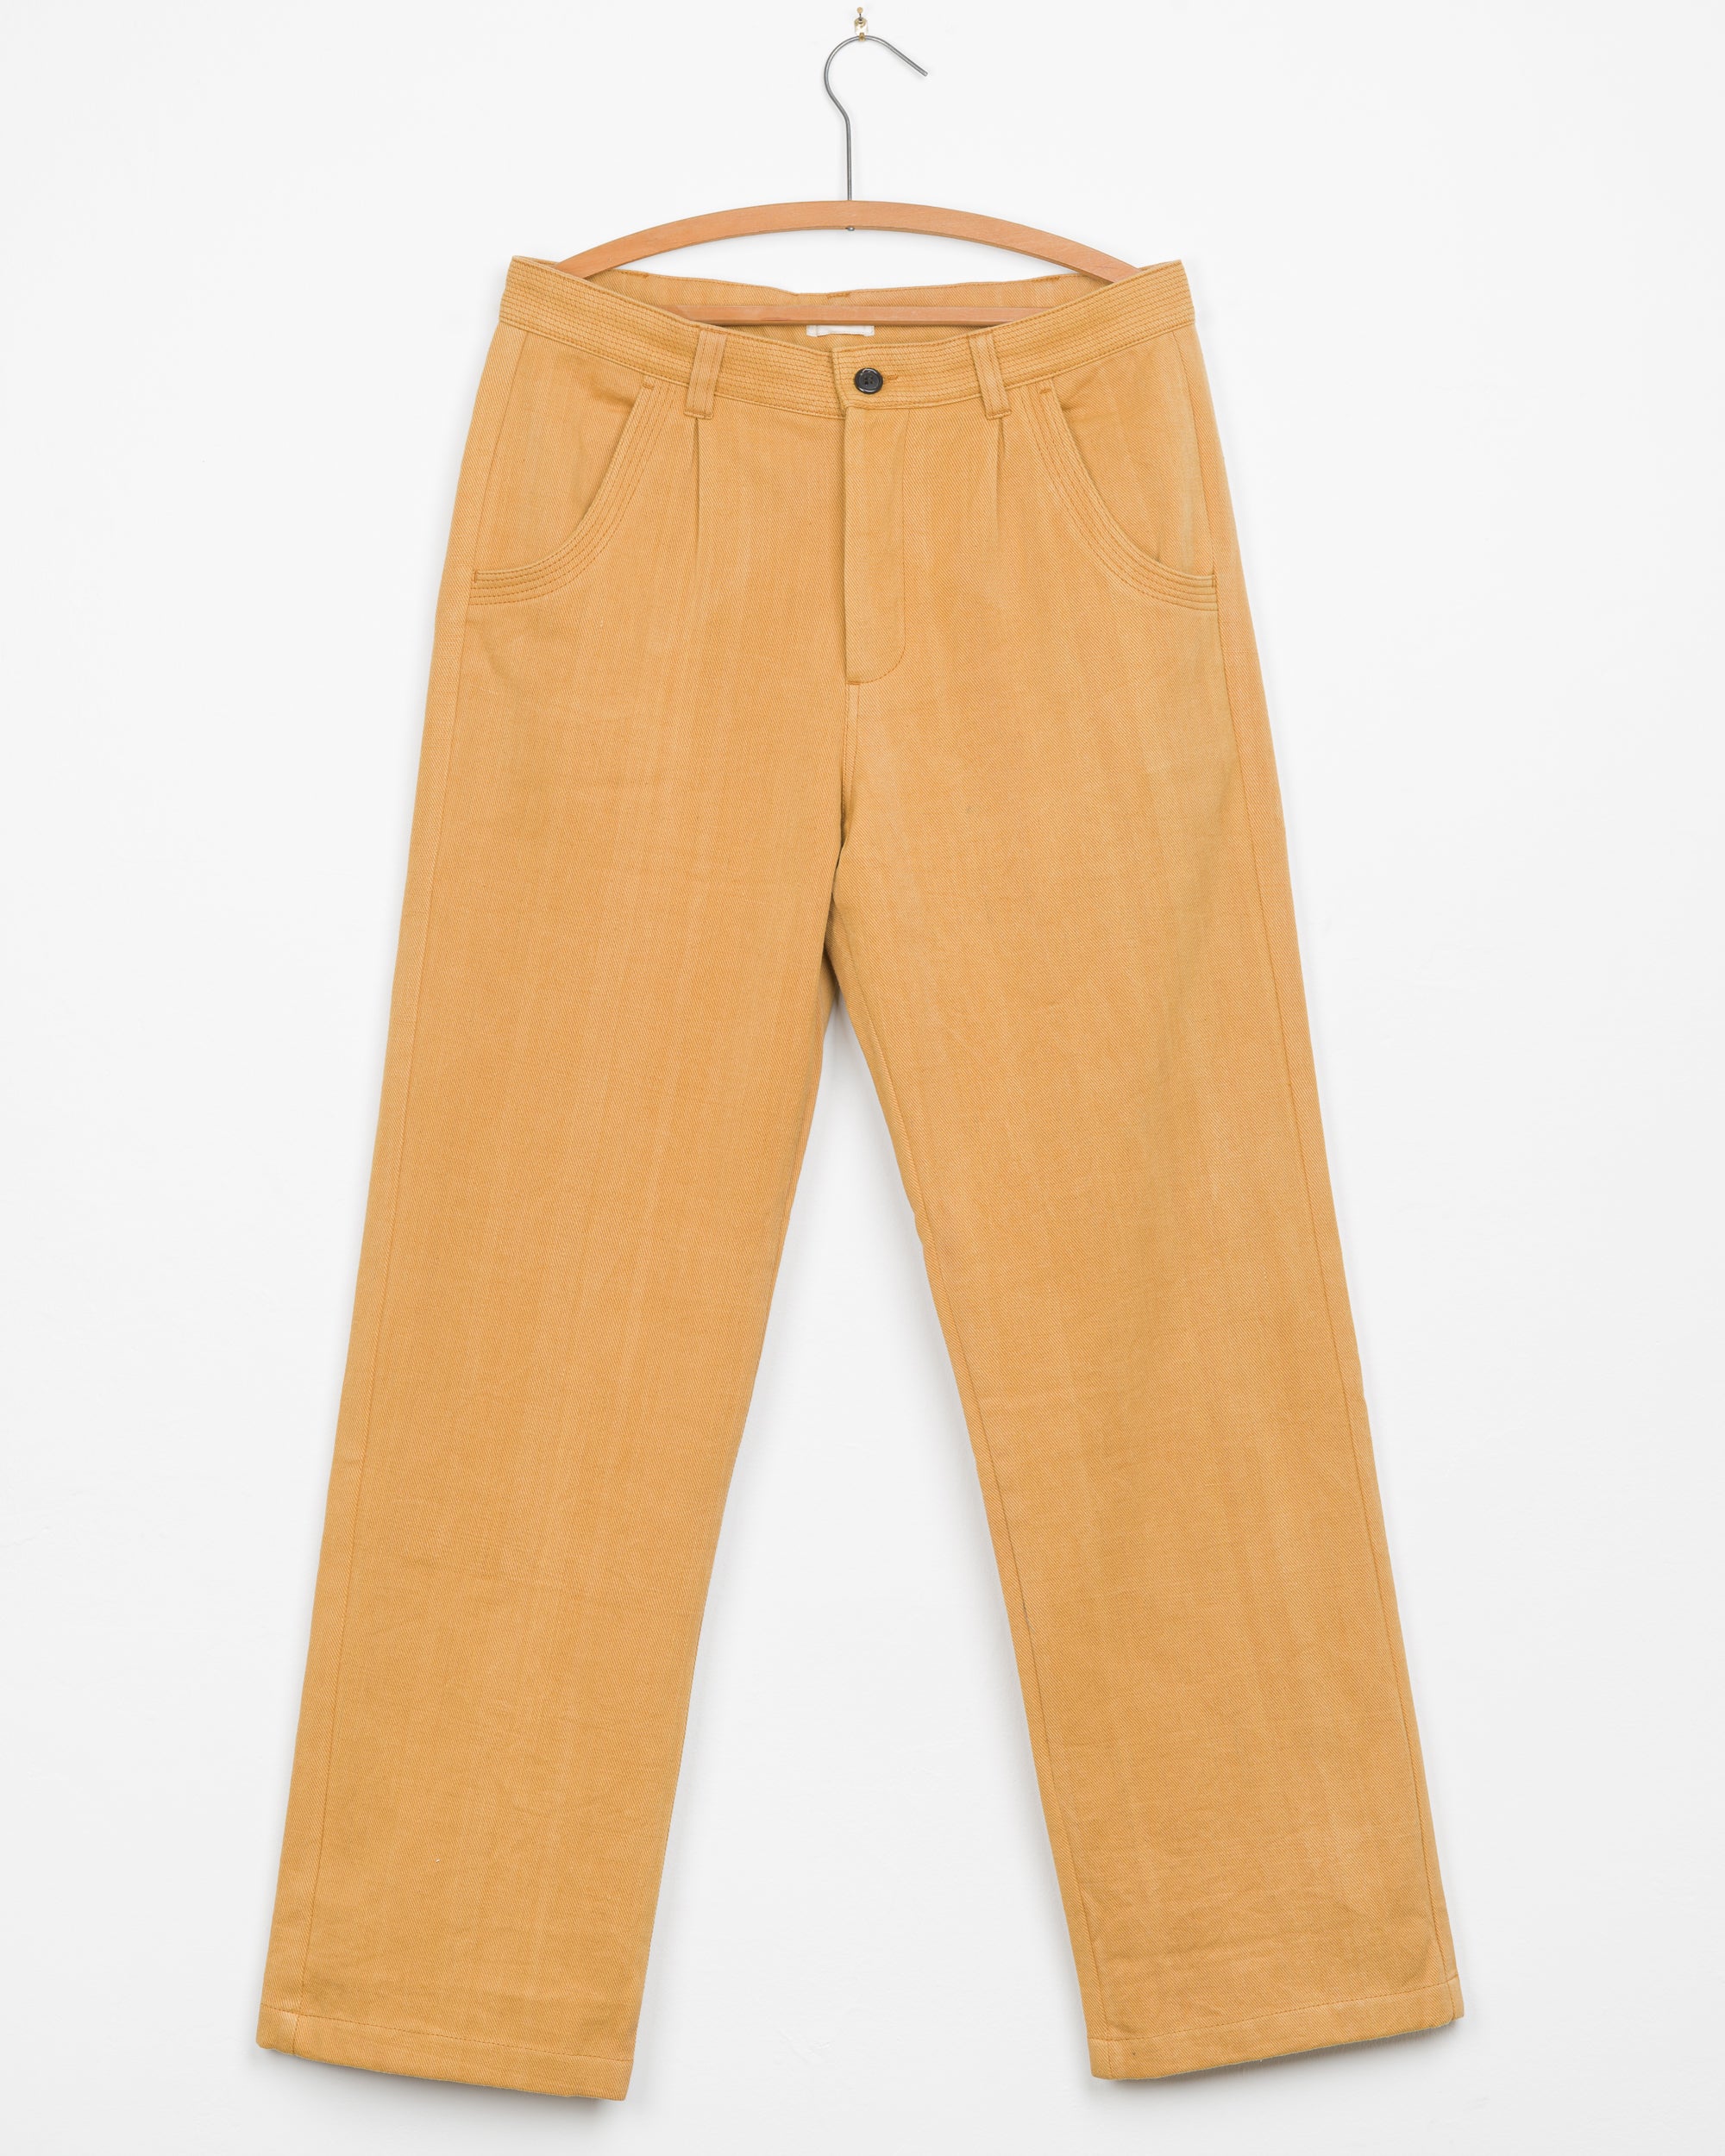 Veda Pant in Mustard Twill